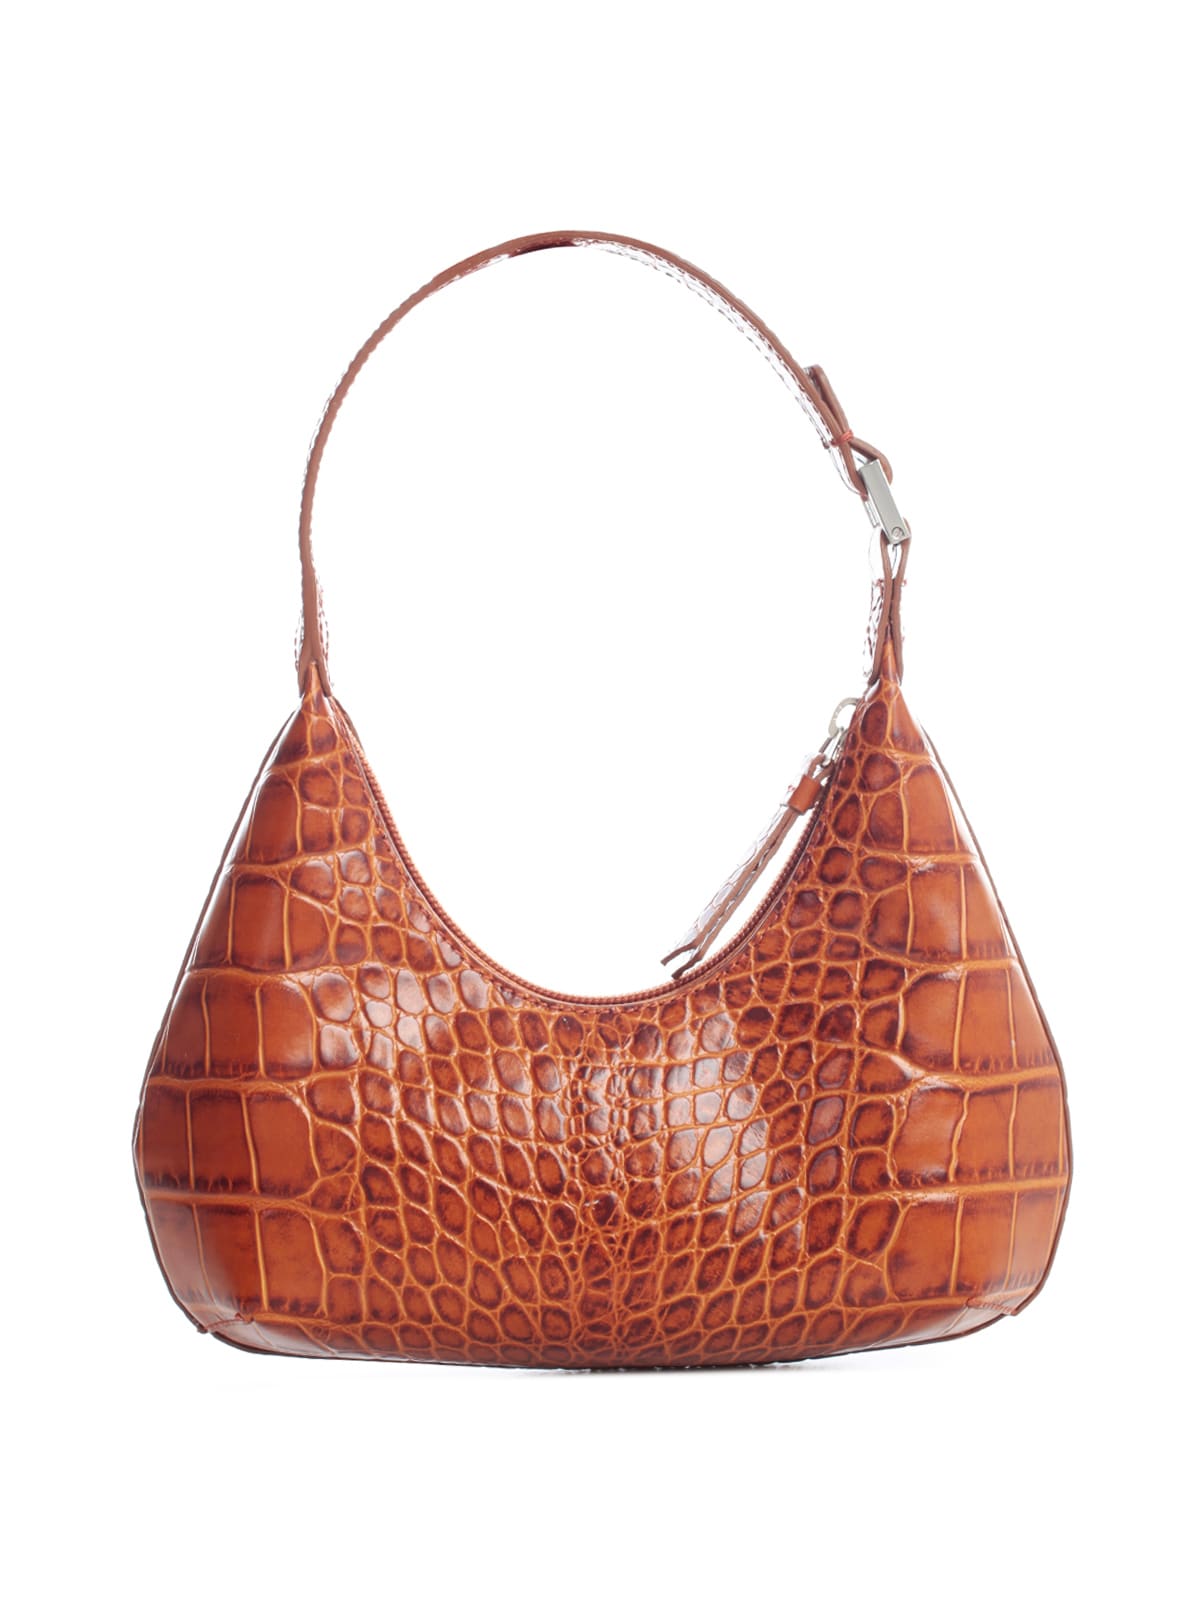 BY FAR Baby Amber Tan Croco Embossed Leather